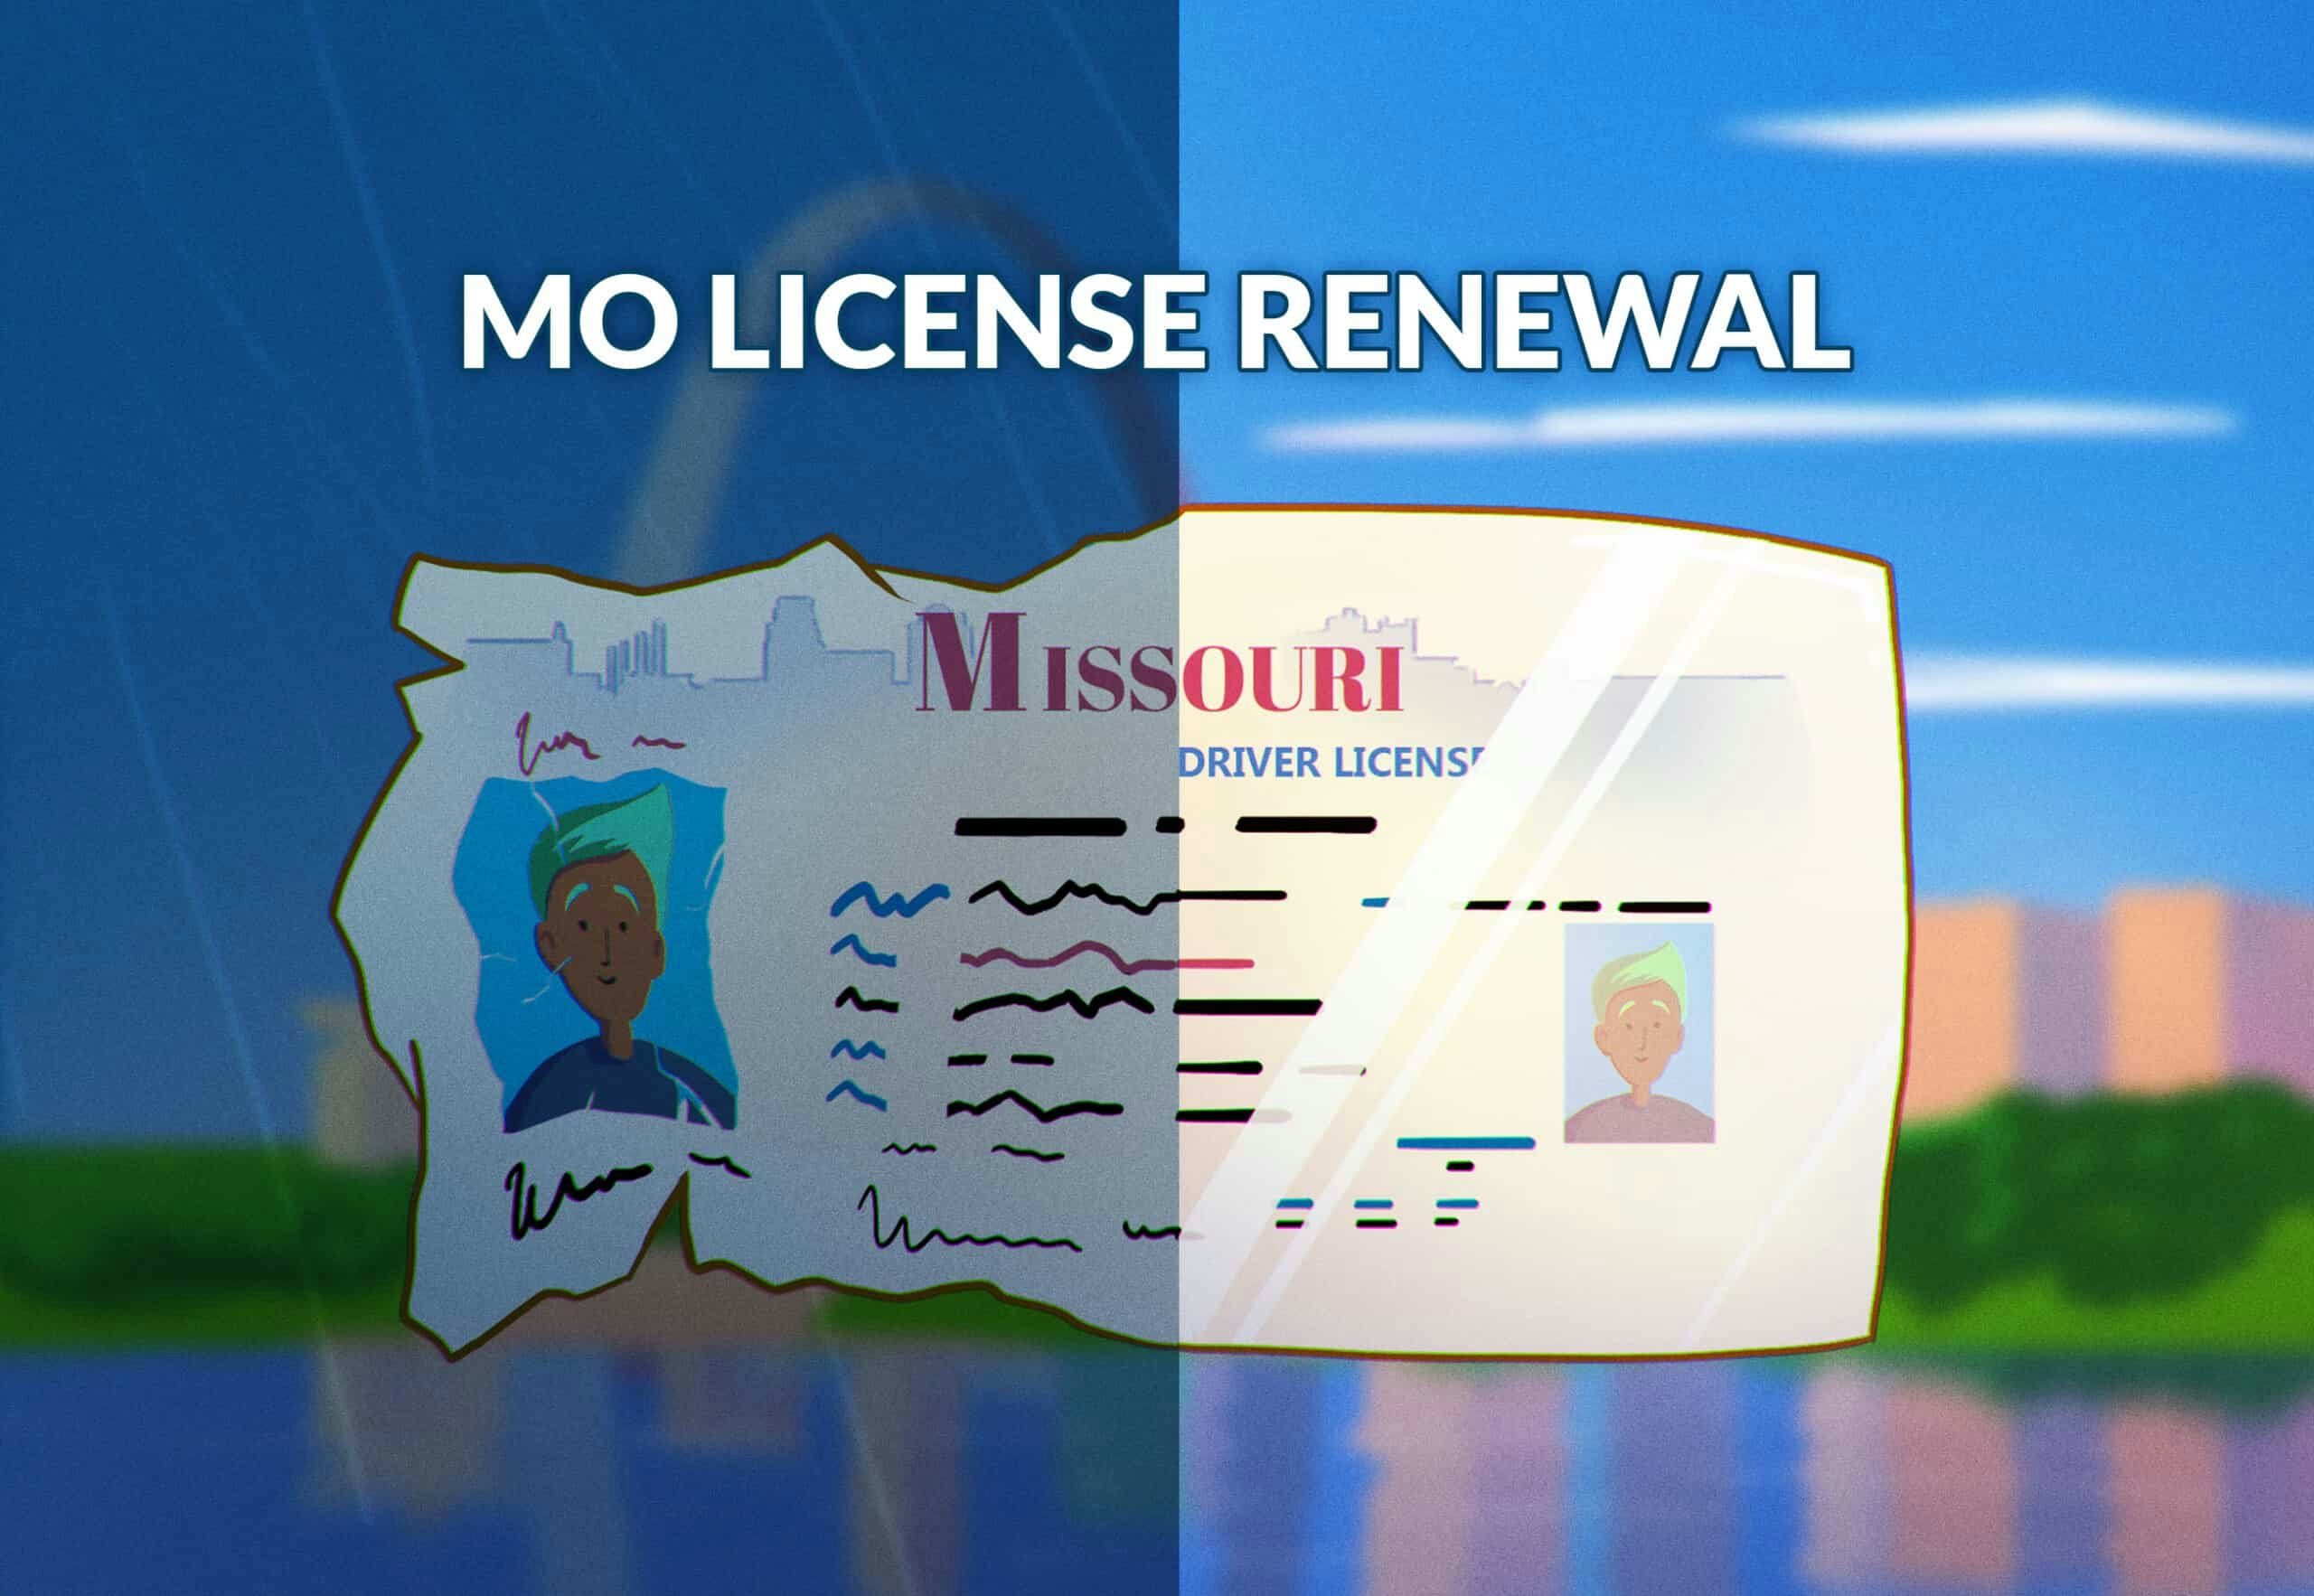 finding missouri drivers license issue date